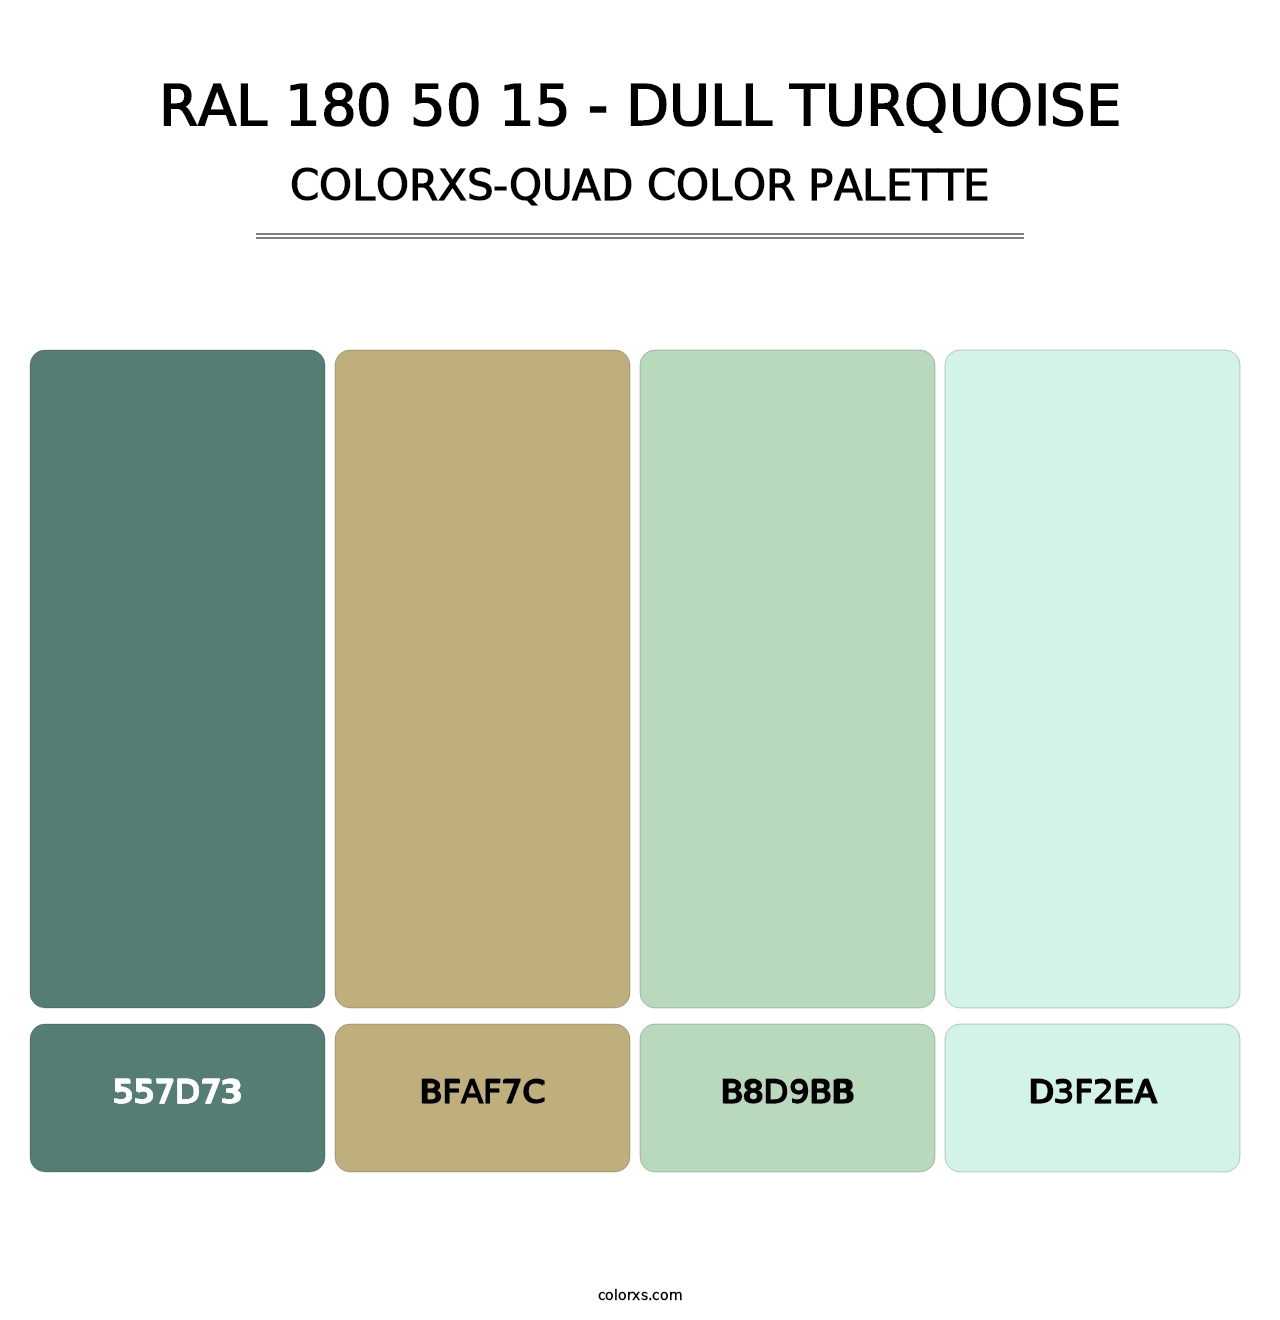 RAL 180 50 15 - Dull Turquoise - Colorxs Quad Palette